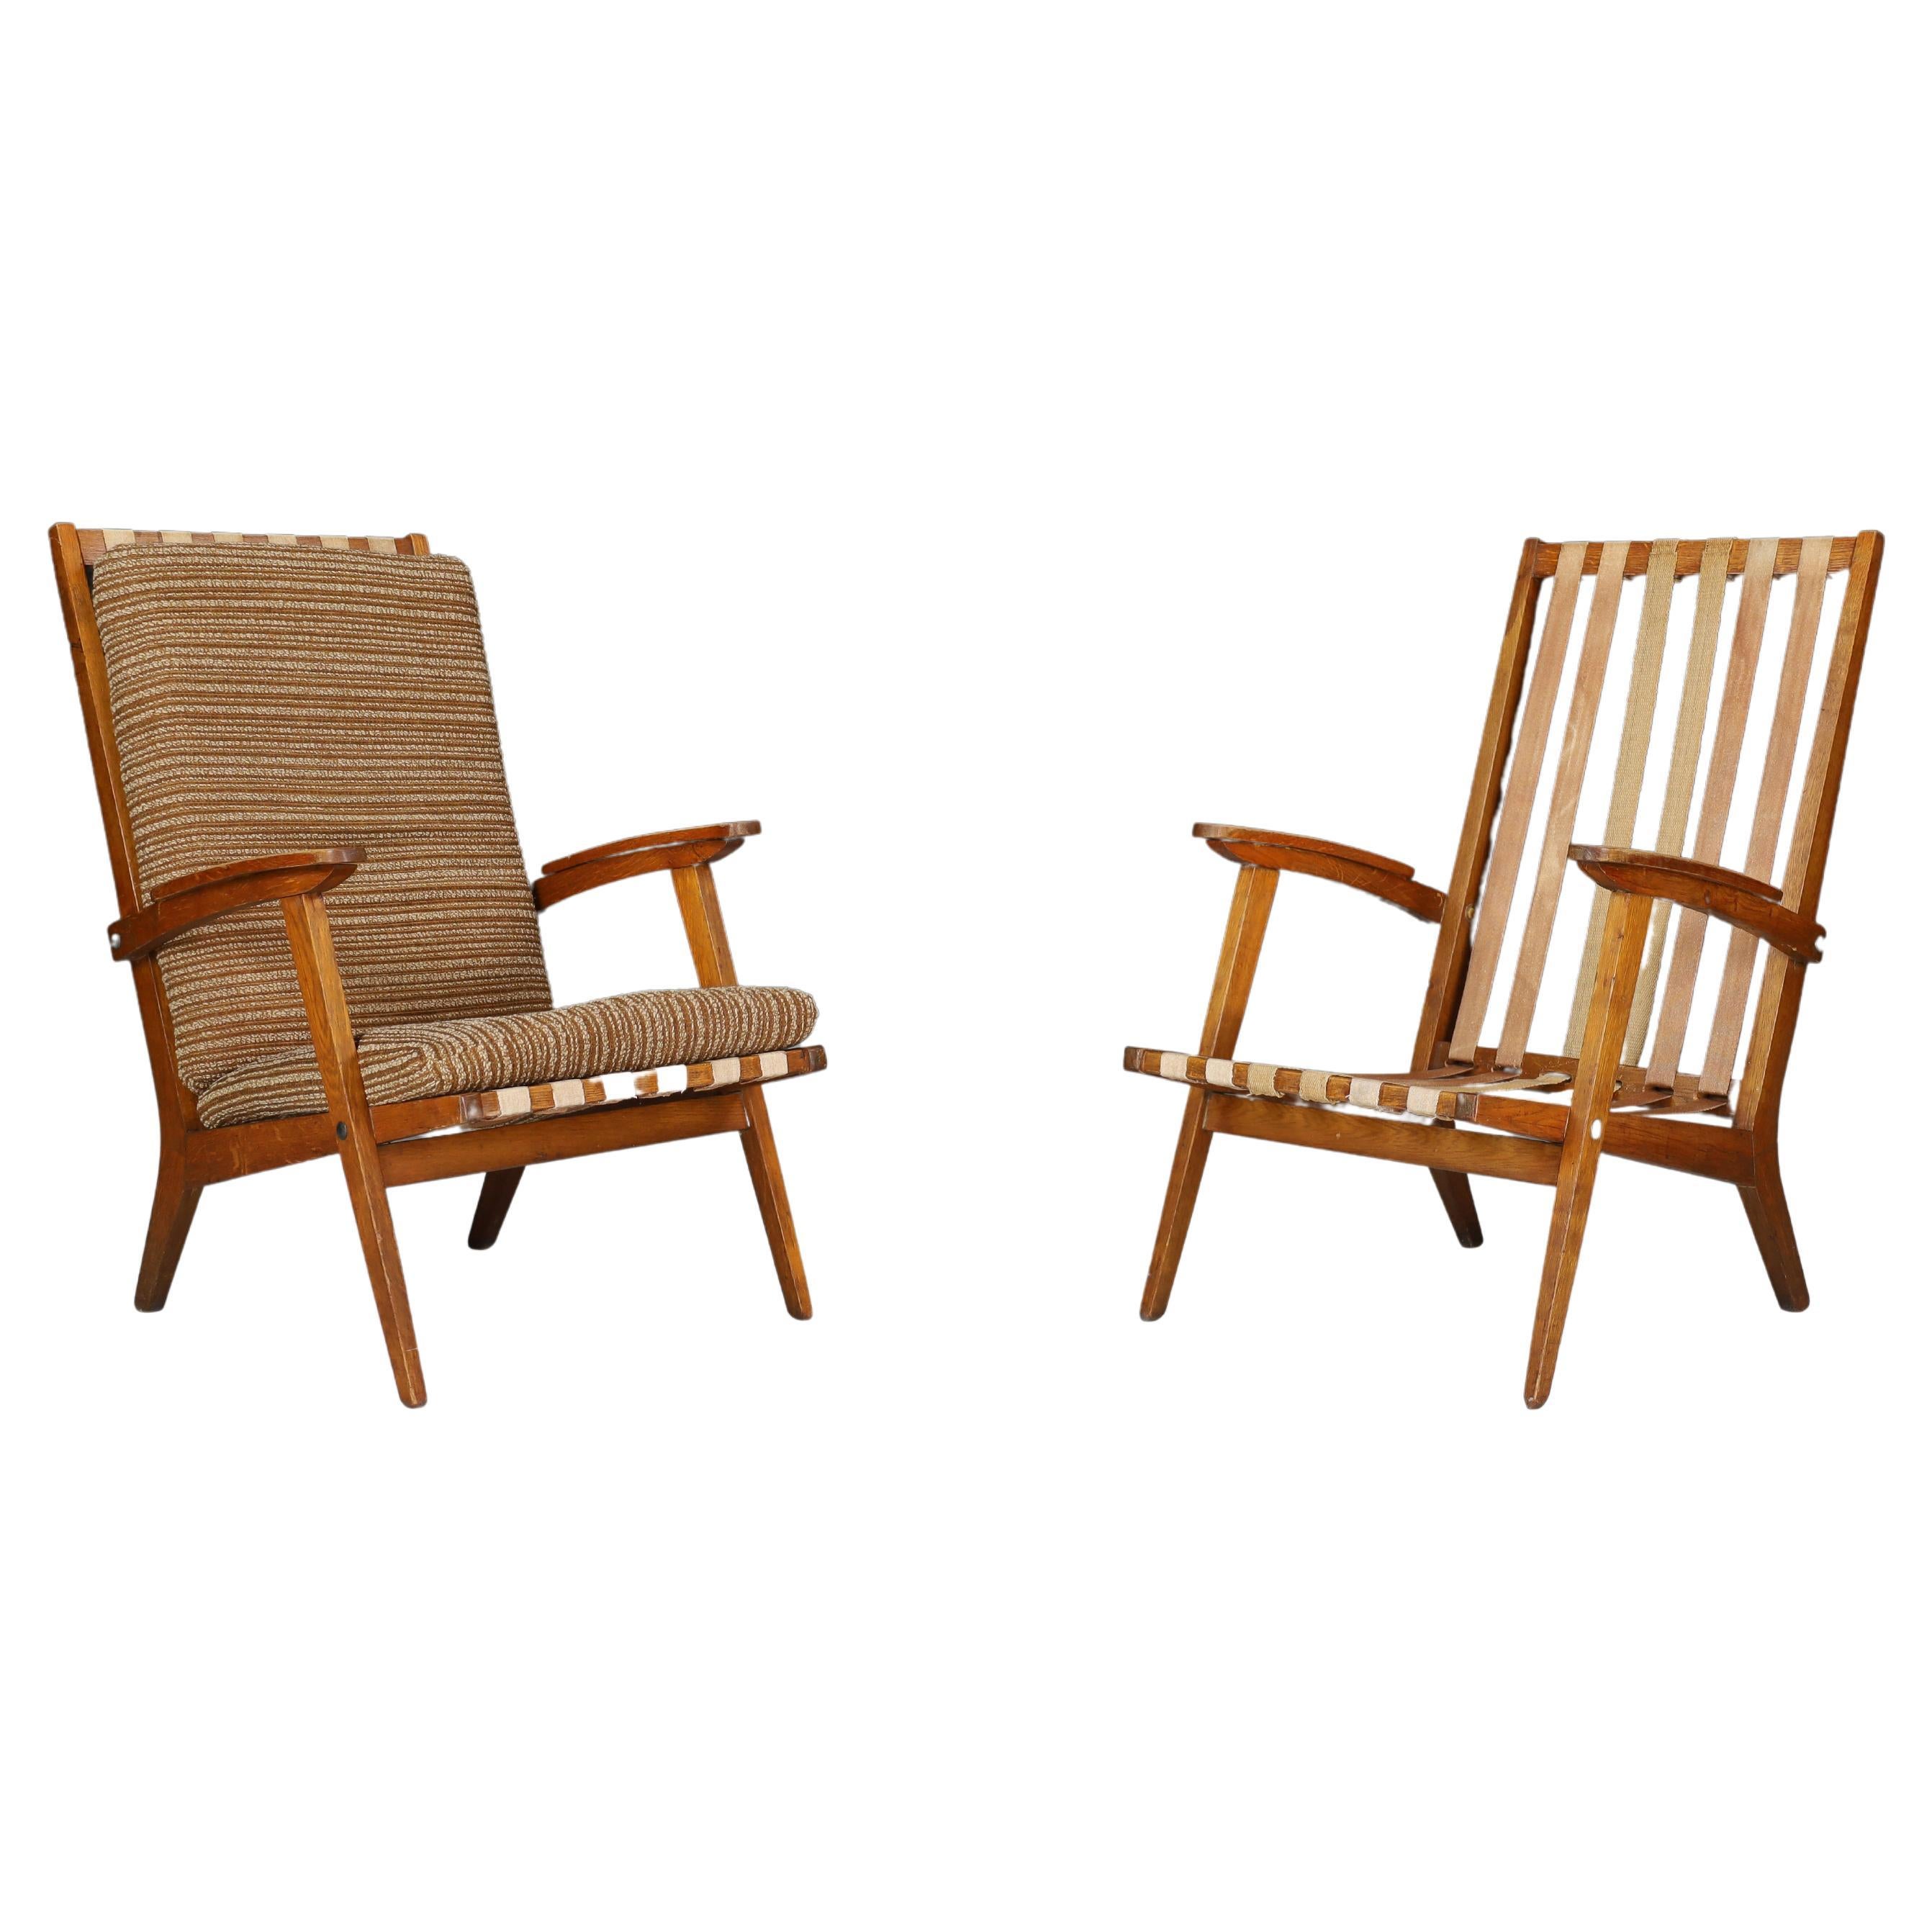 Oak Sculptural Lounge Chairs with Brown Upholstery, France, 1950s For Sale